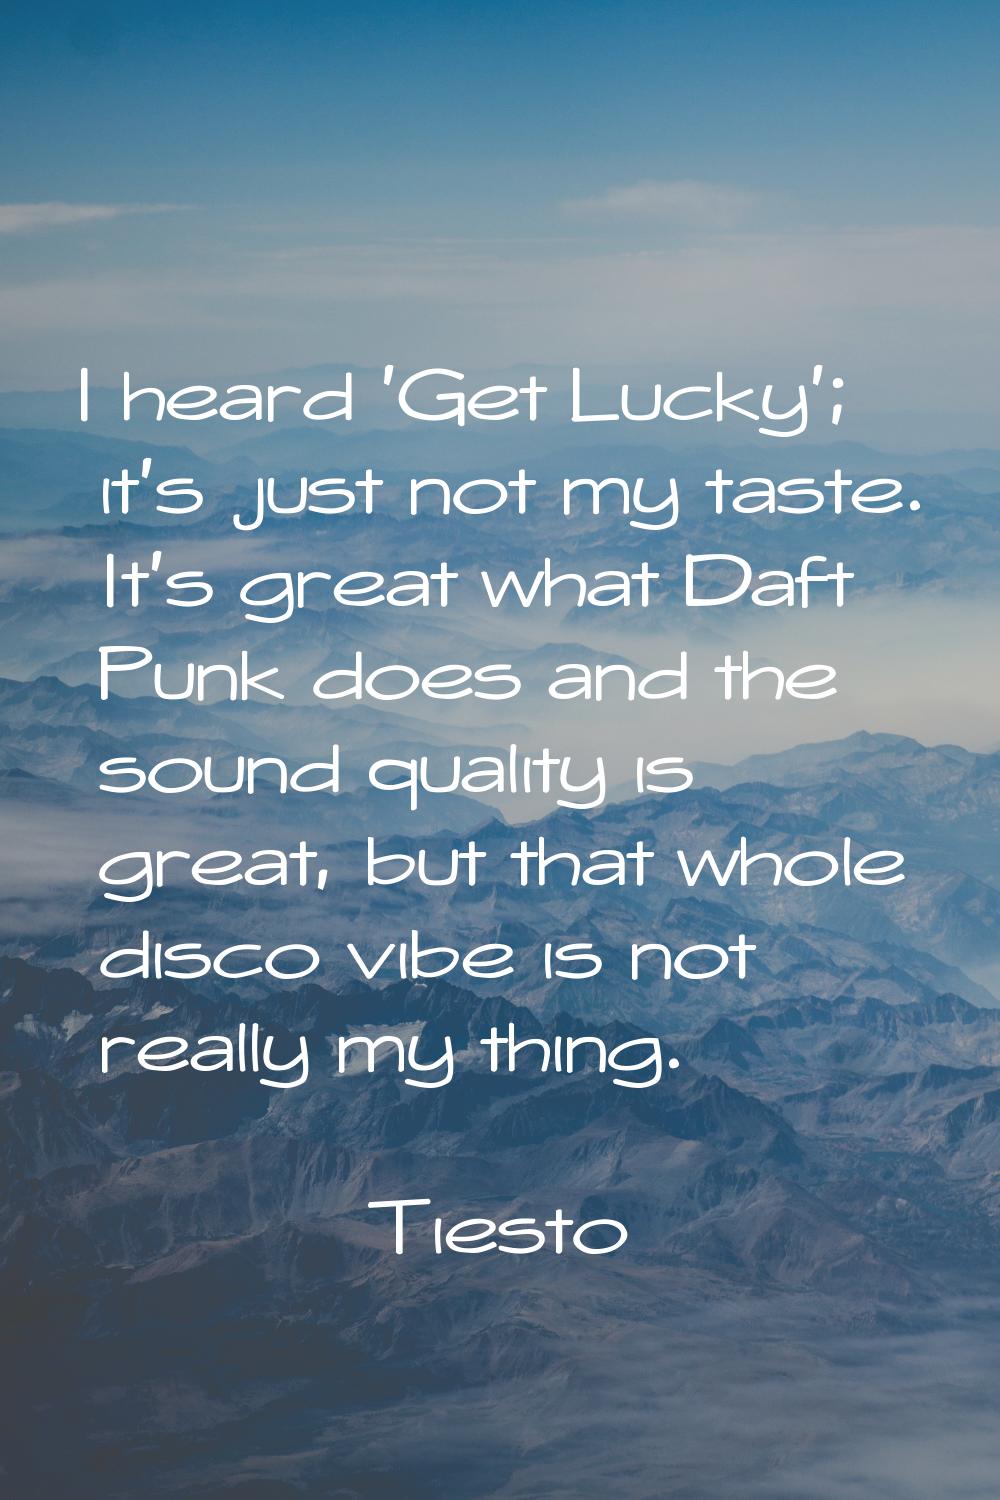 I heard 'Get Lucky'; it's just not my taste. It's great what Daft Punk does and the sound quality i